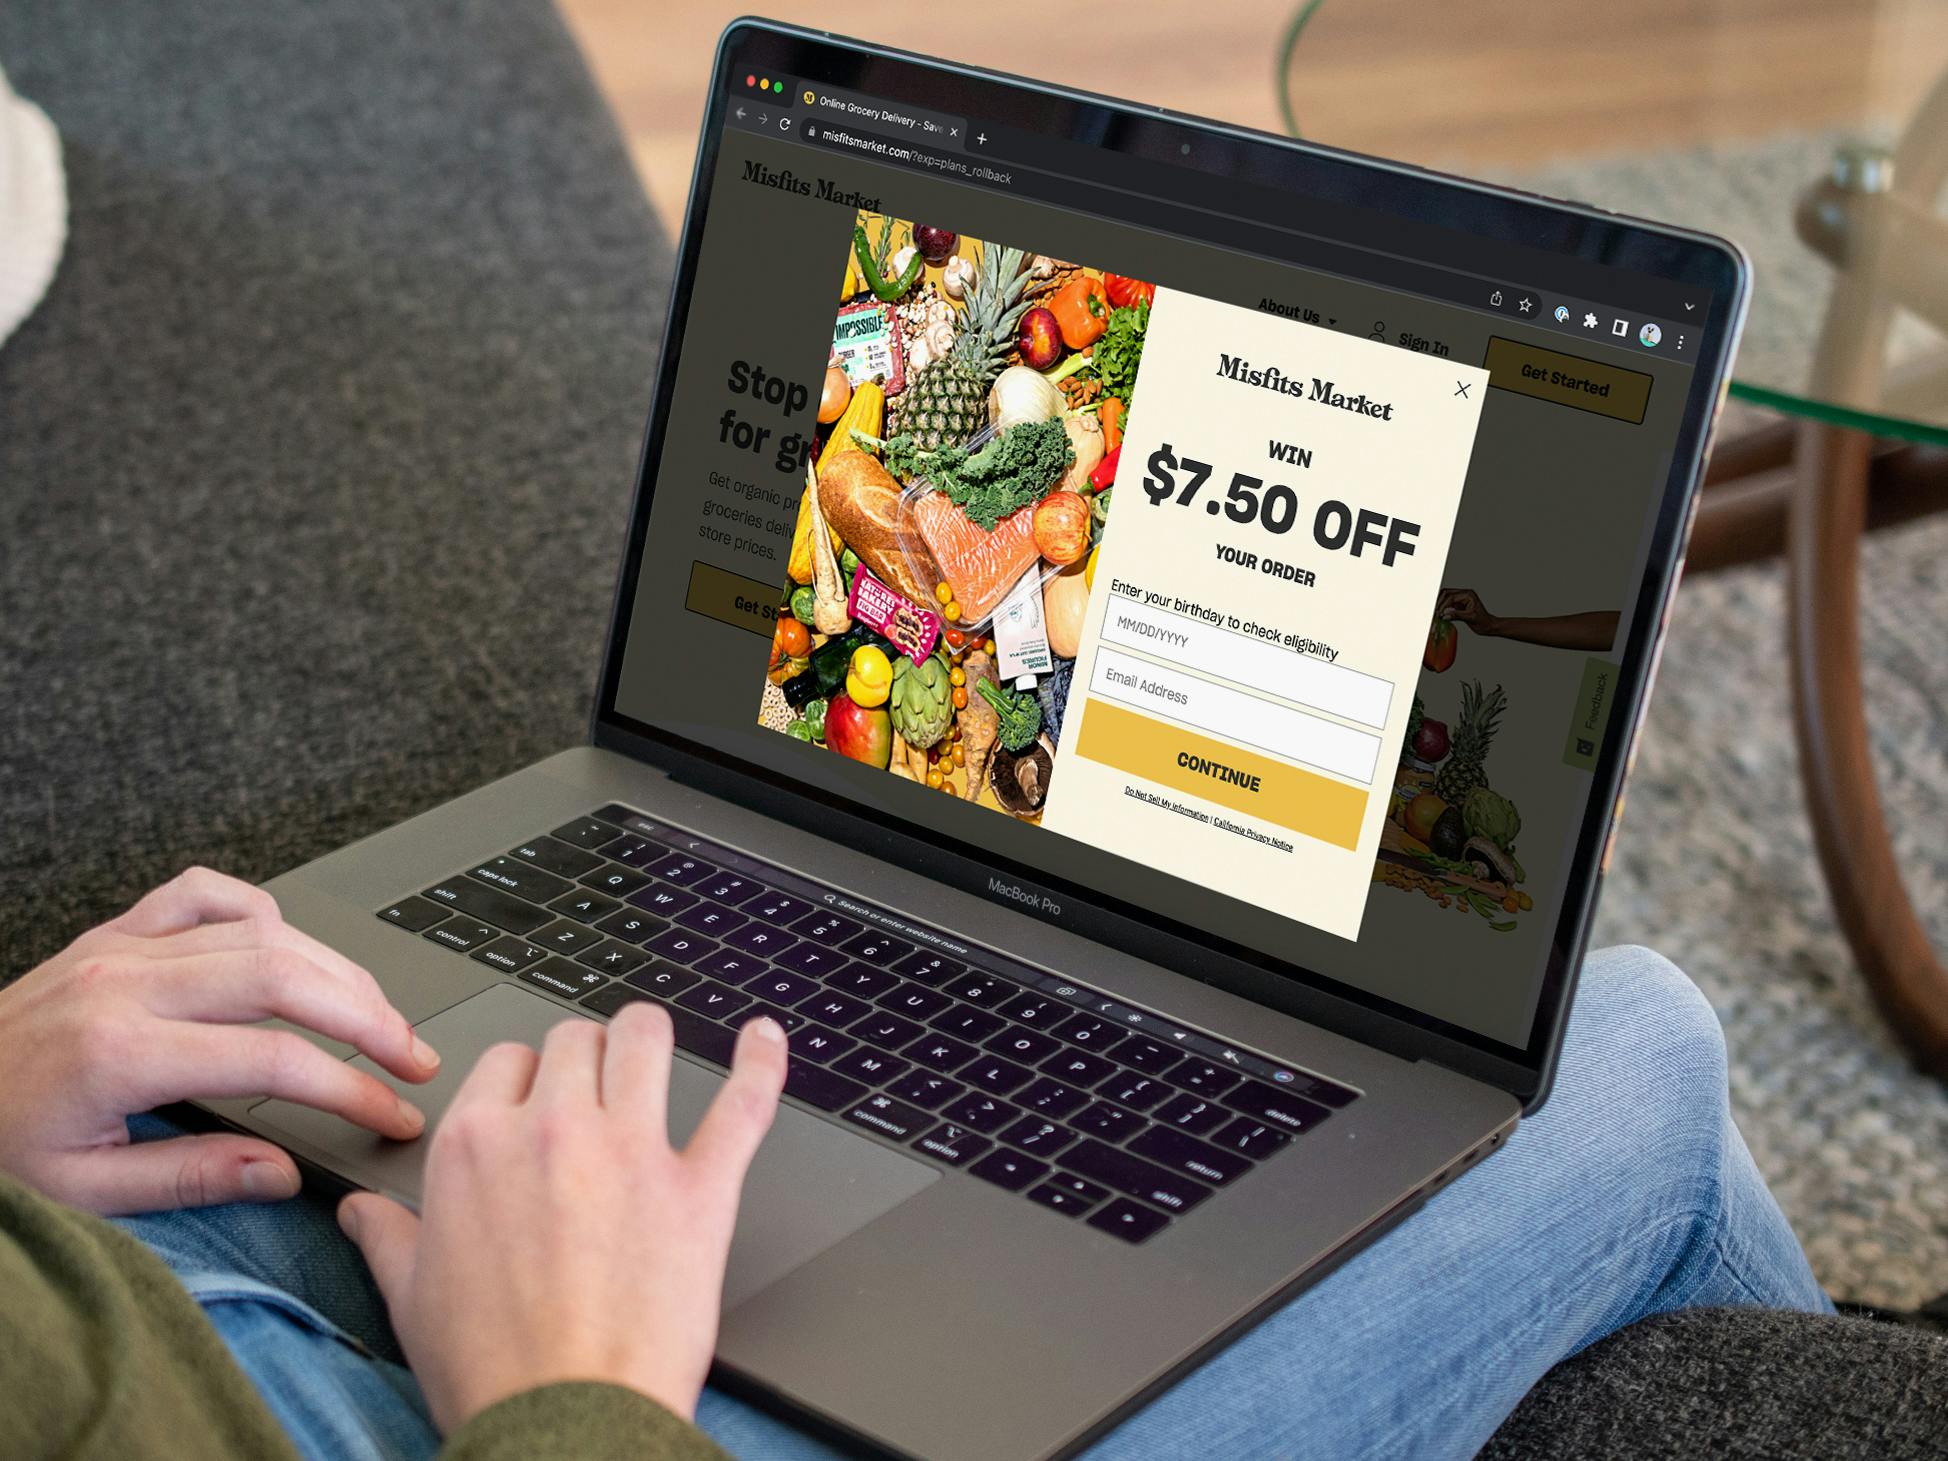 A person receiving a coupon on the Misfits Market website